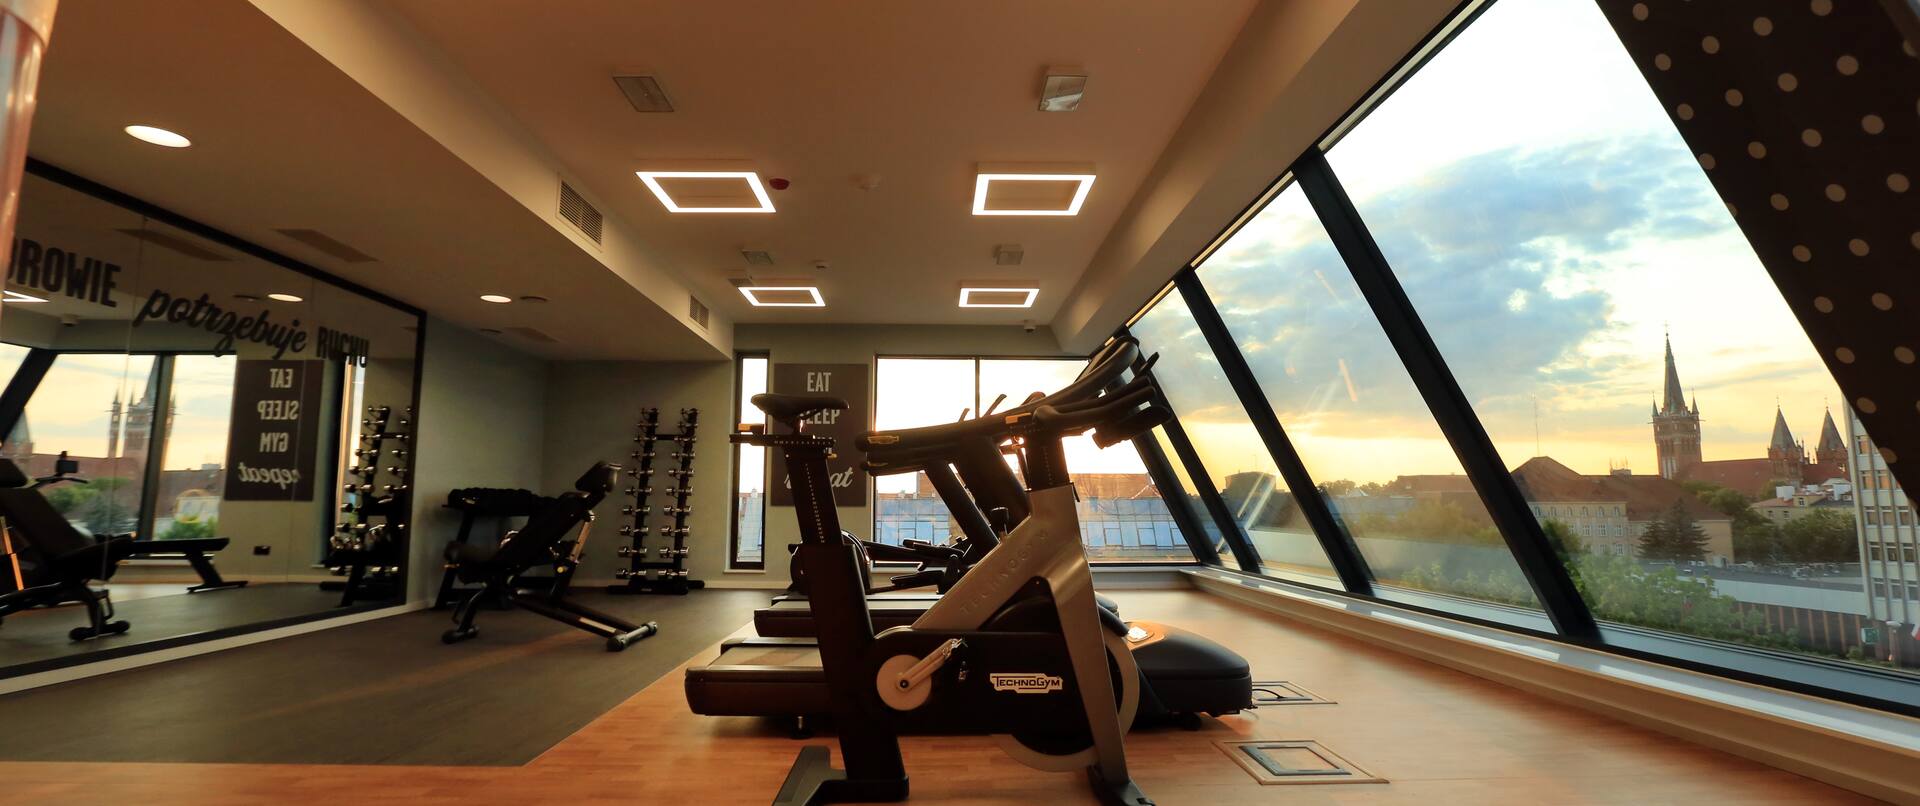 Fitness center with exercise machines and city view